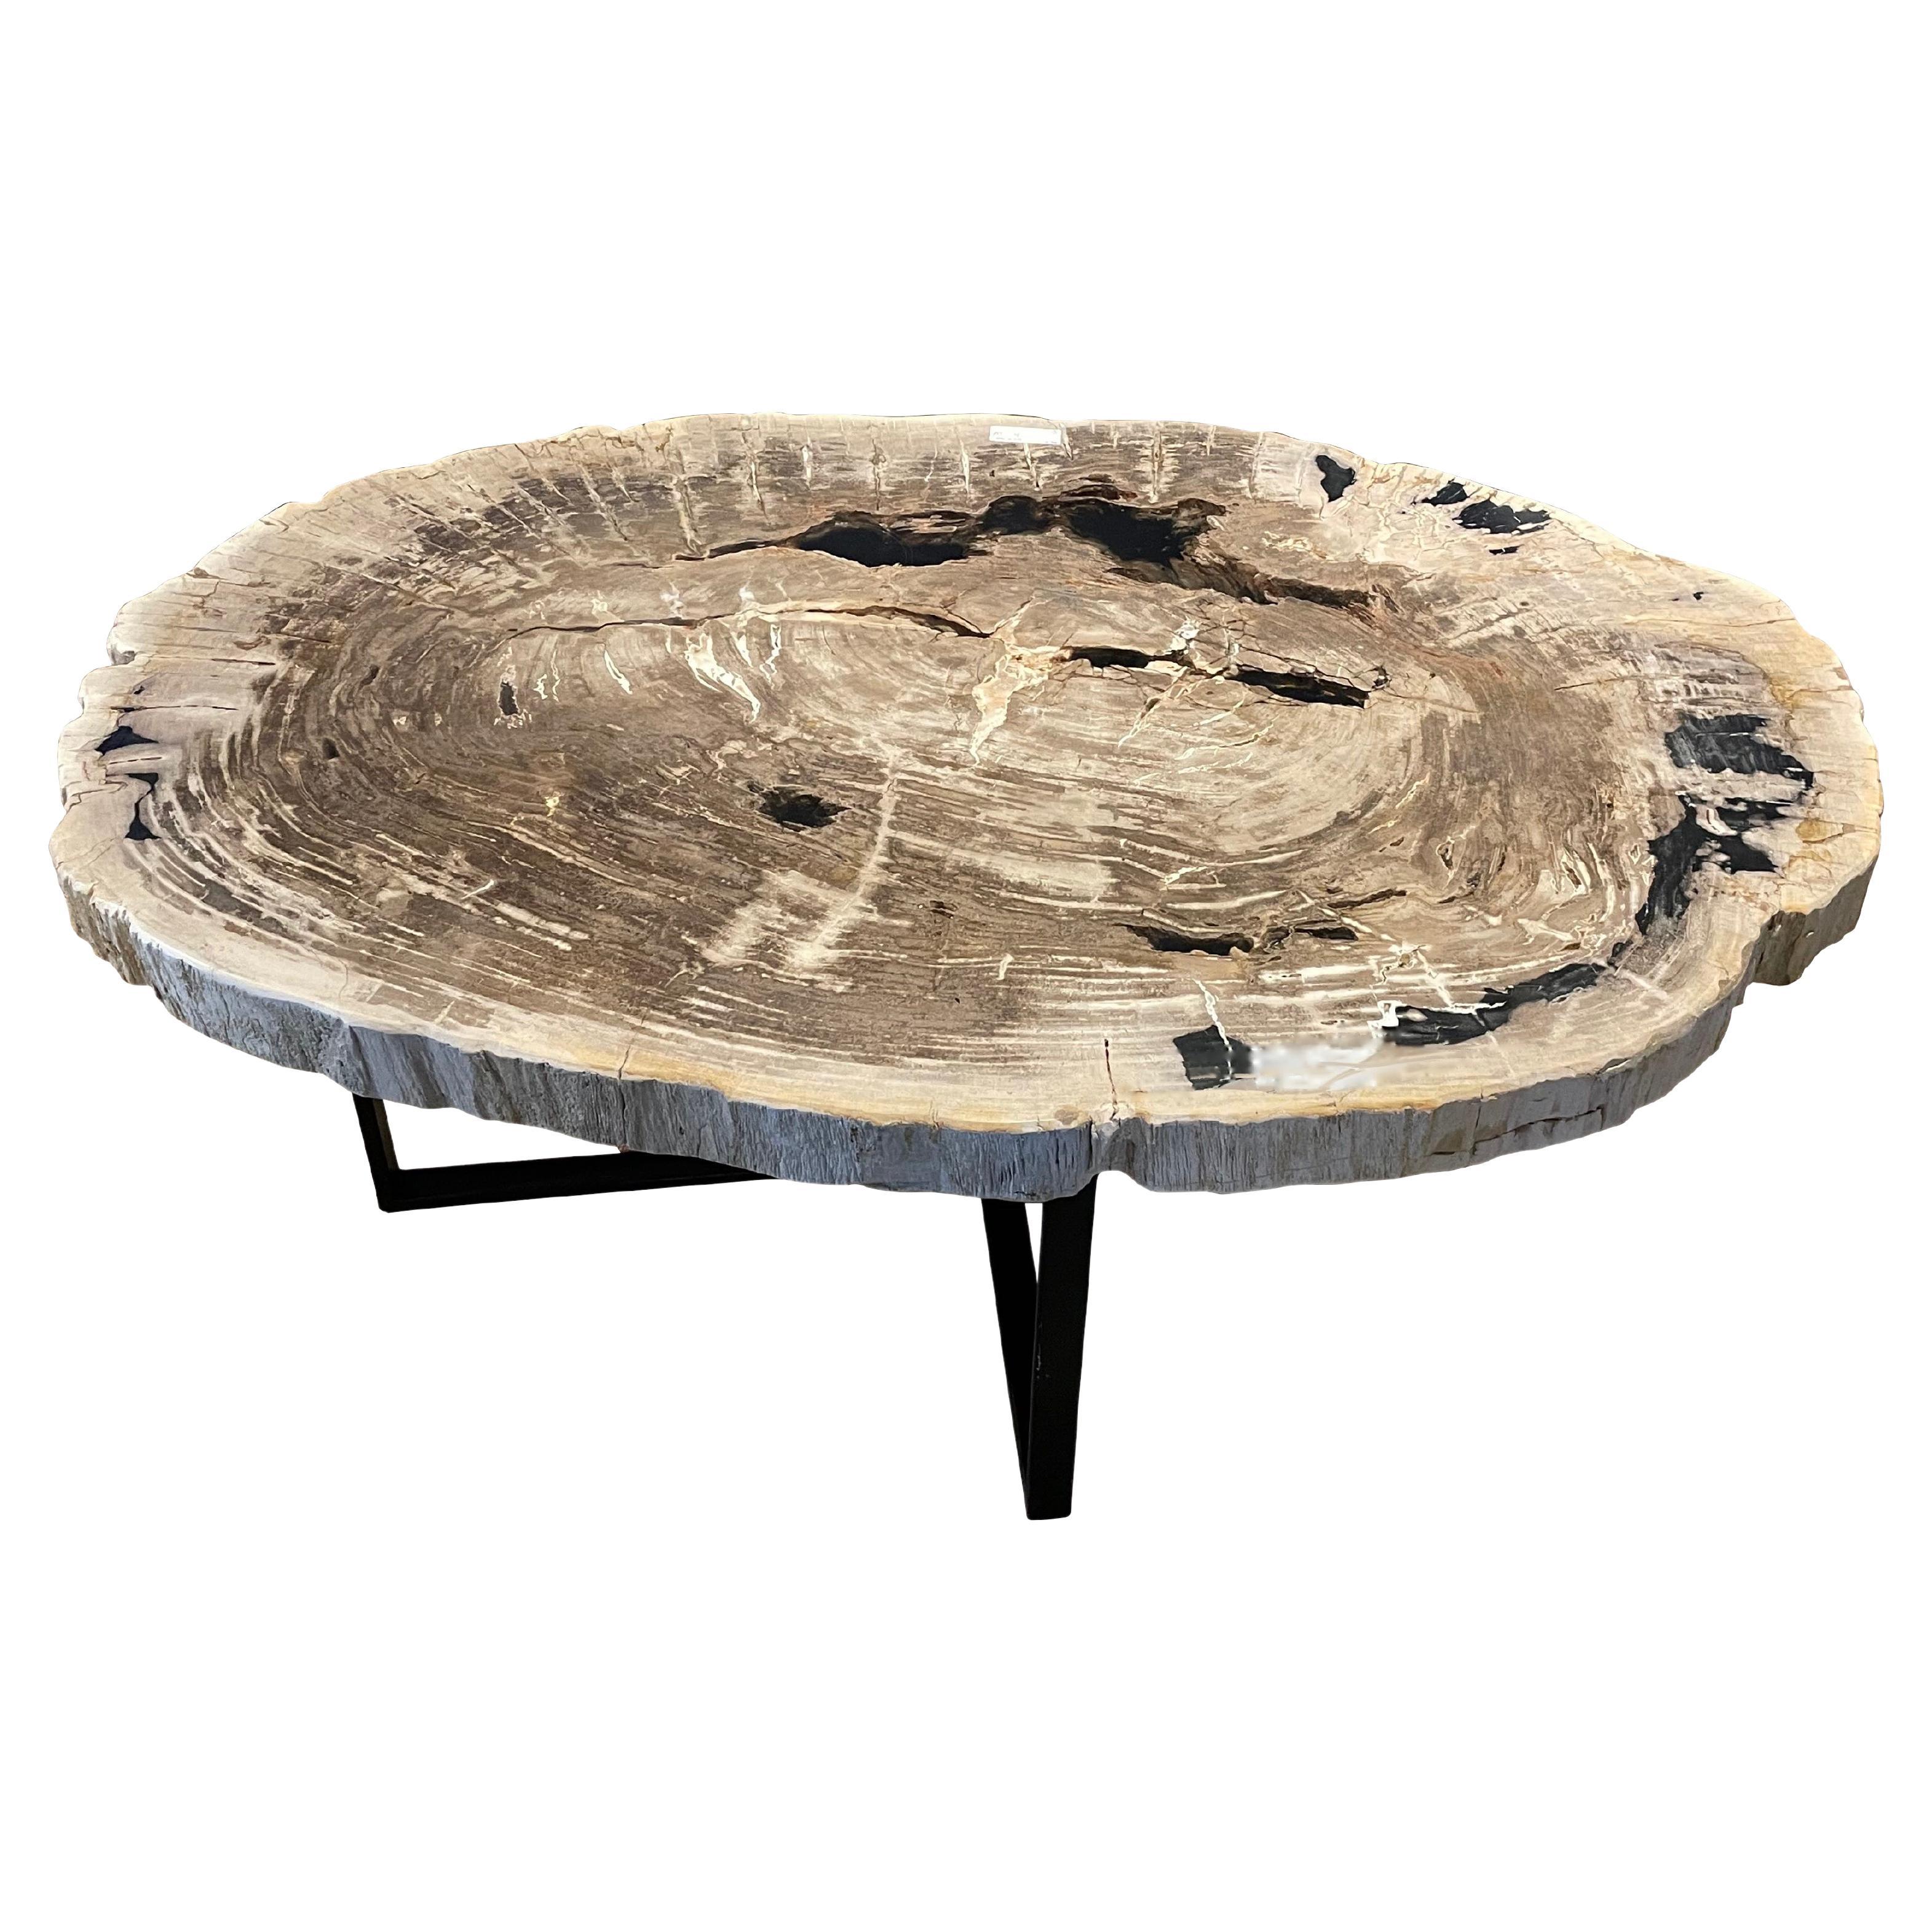 Taupe, Cream, Black Large Petrified Wood Coffee Table, Indonesia, Contemporary For Sale